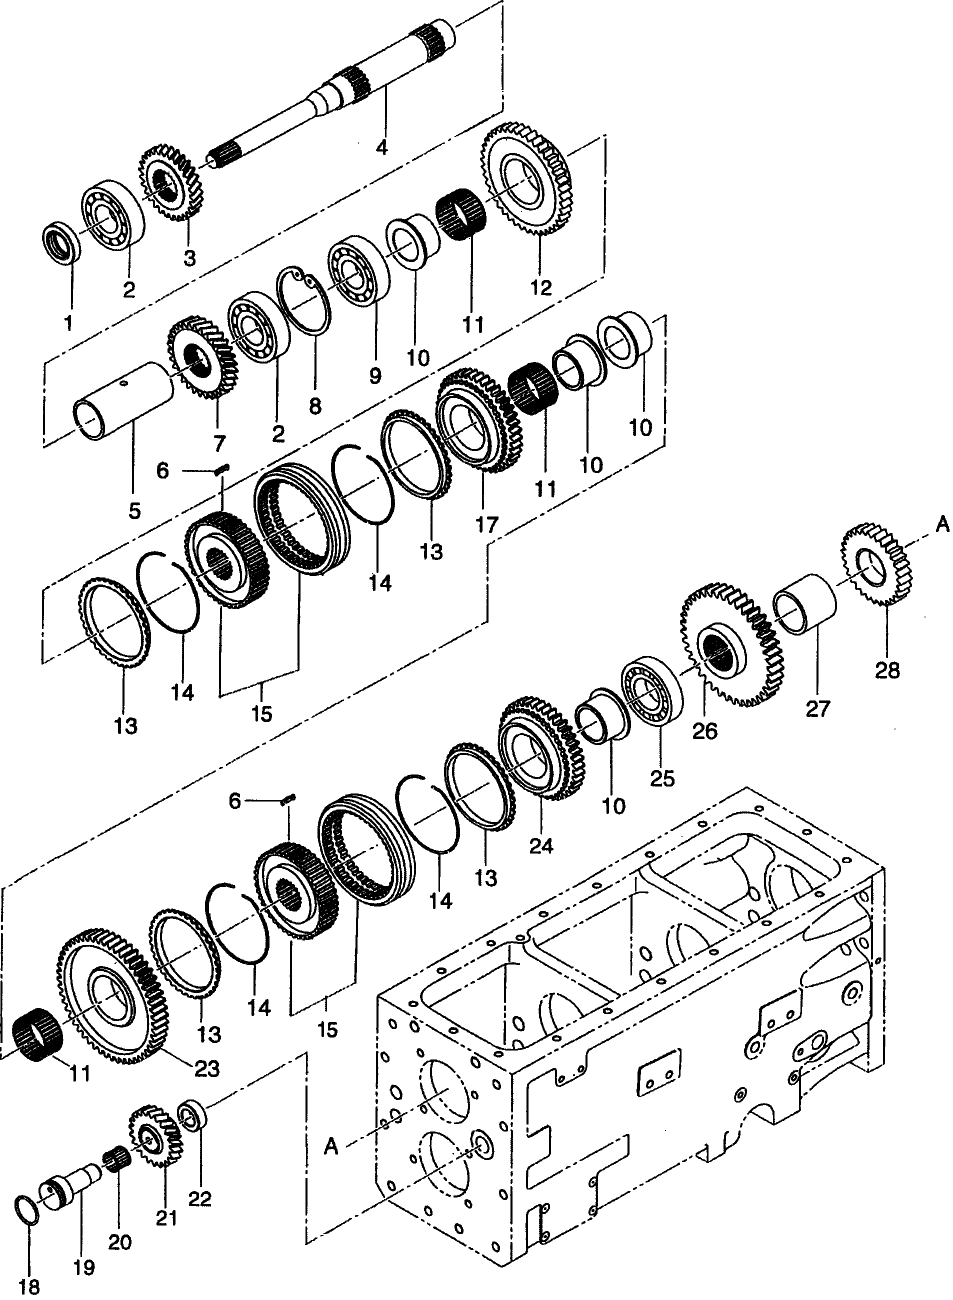 03.04 FRONT TRANSMISSION GEARS - EHSS